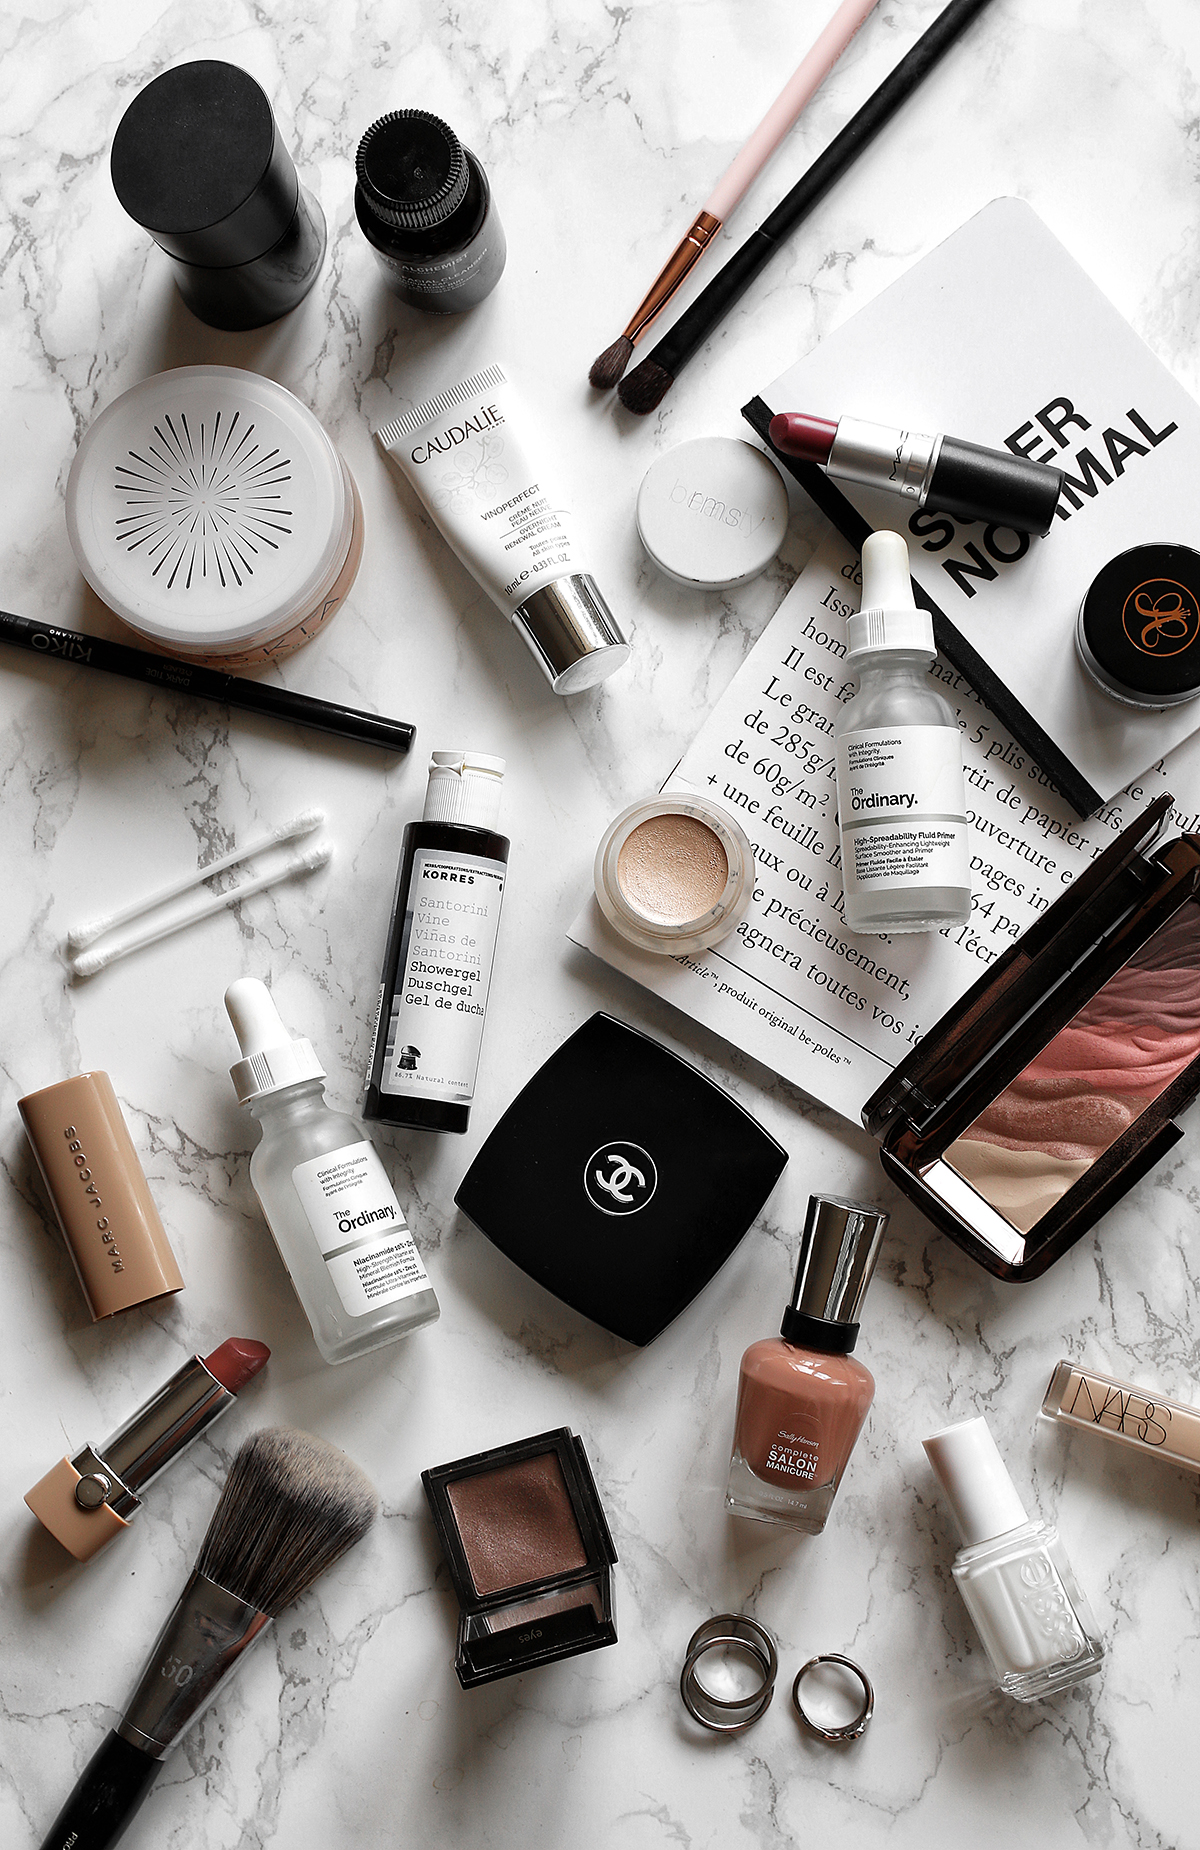 10 smart tips to become a better beauty shopper - The Lifestyle Files